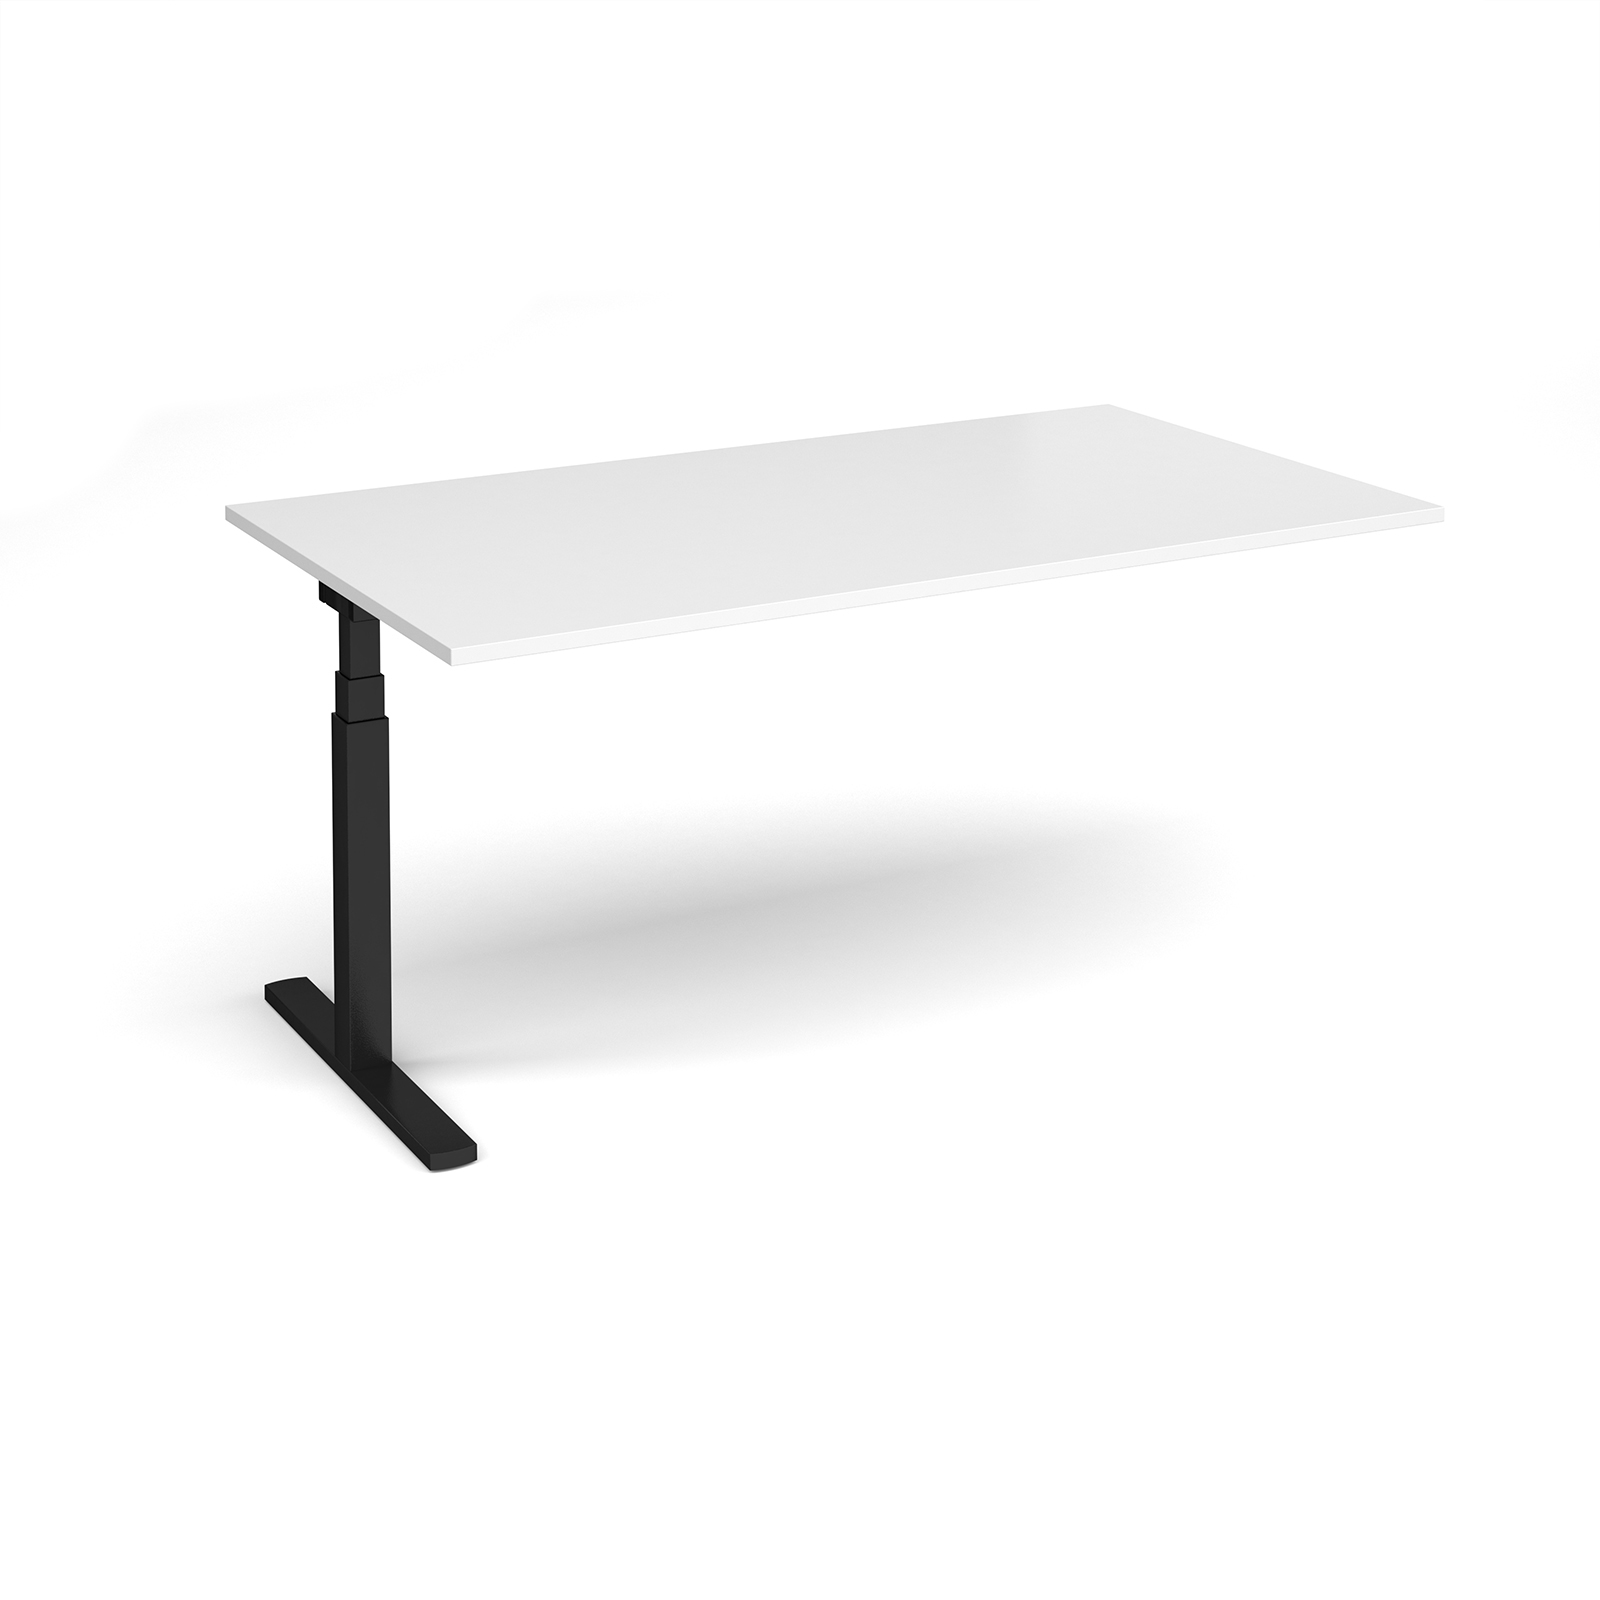 Elev8 Touch boardroom table add on unit 1800mm x 1000mm - black frame, white top